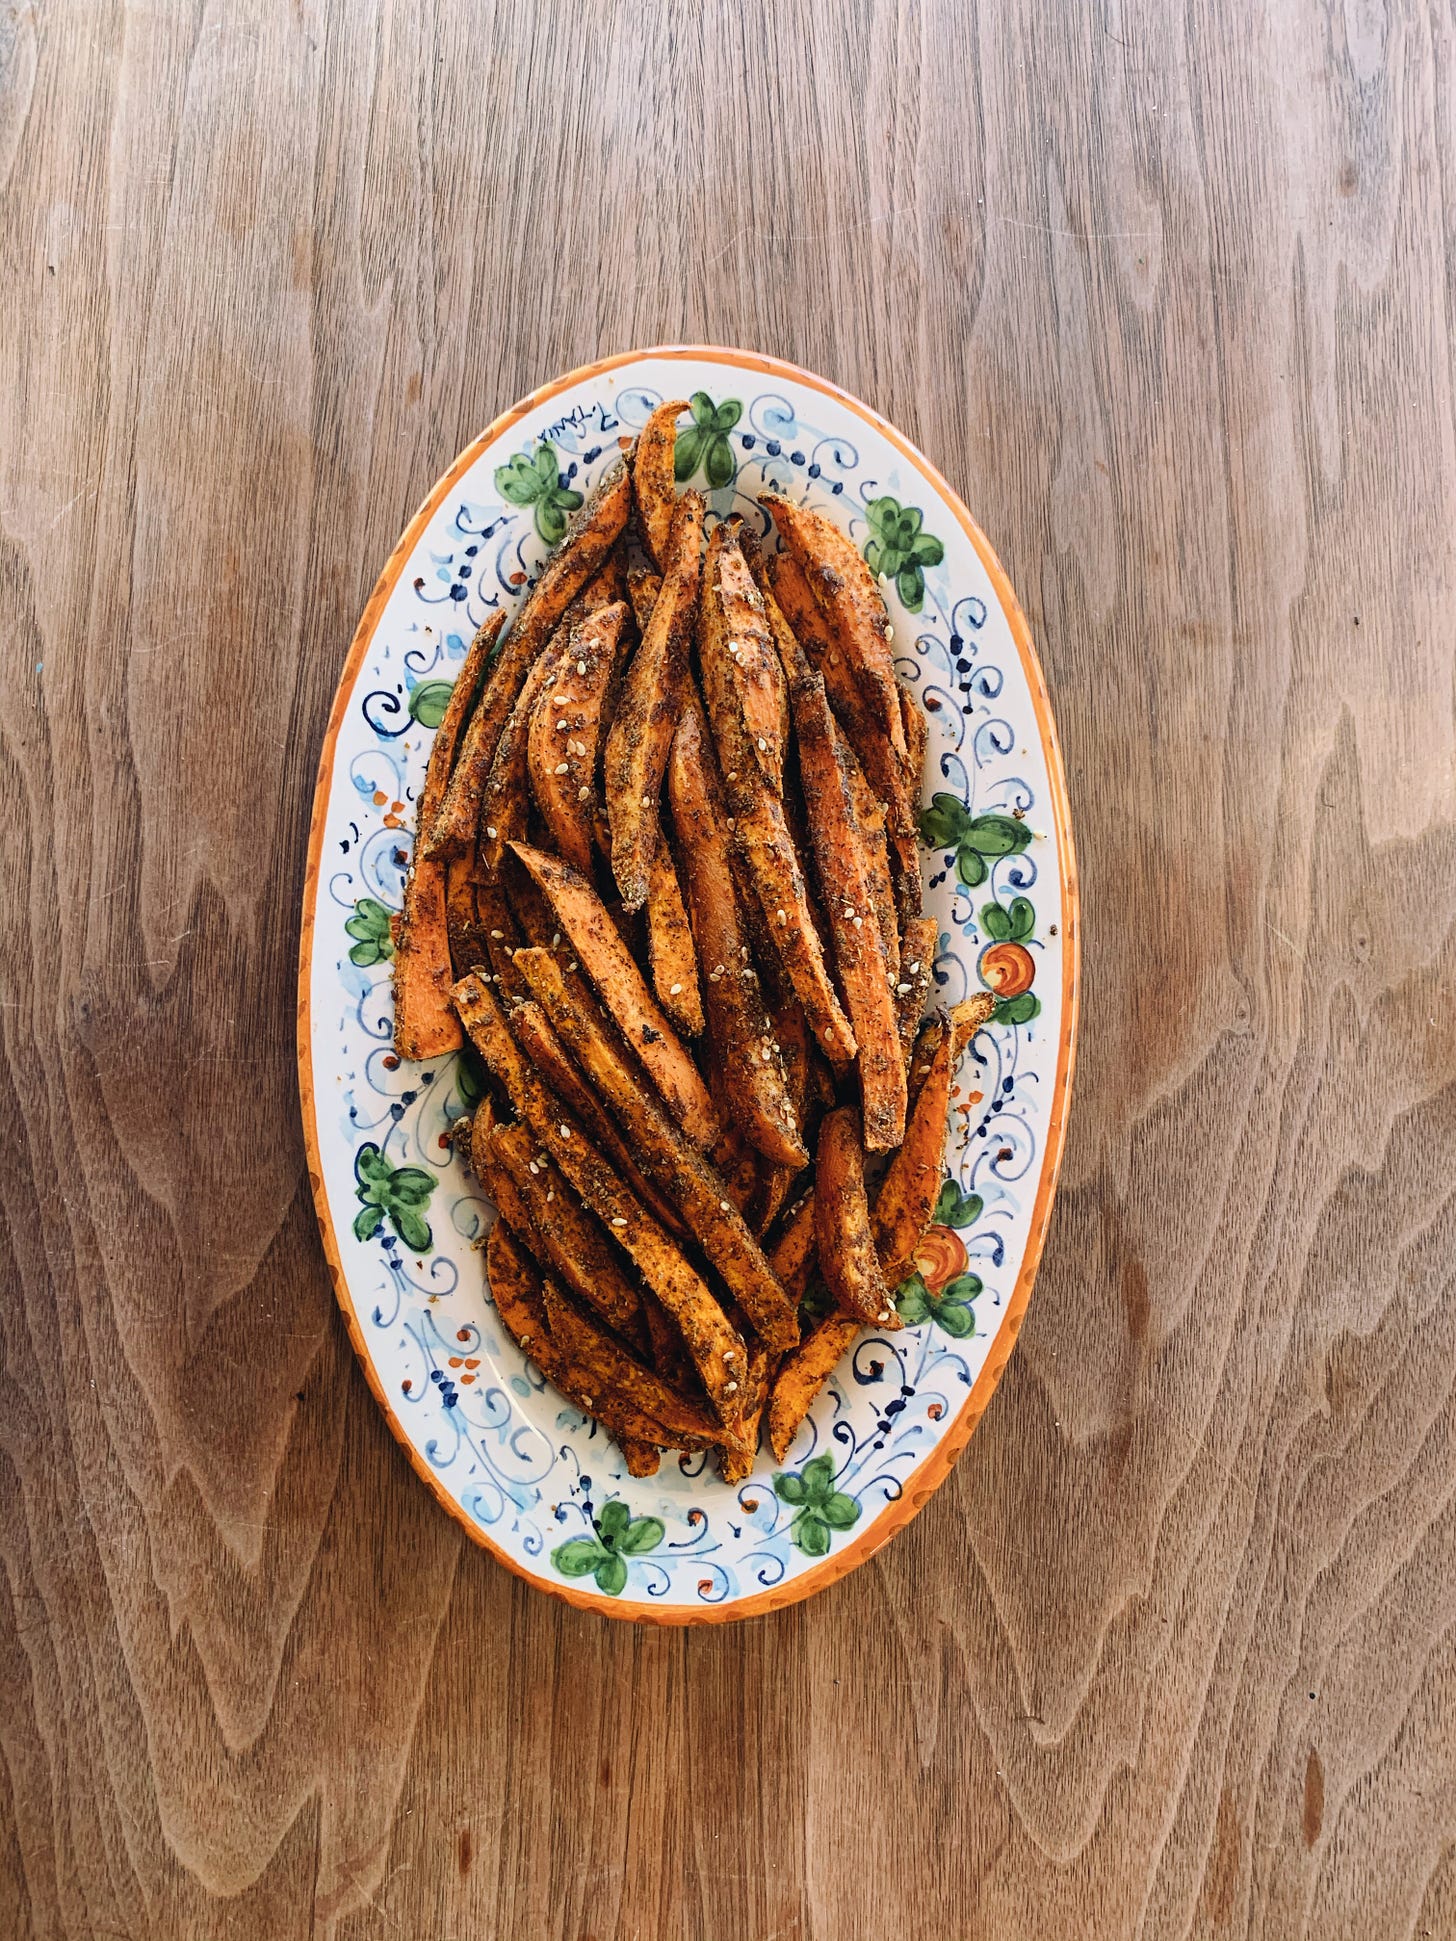 sweet potato fries baked and covered in spices. they are arranged on a decorative plate with an orange rim and green flower designs. the photo is taken from above and the plate is sitting on a table top. 